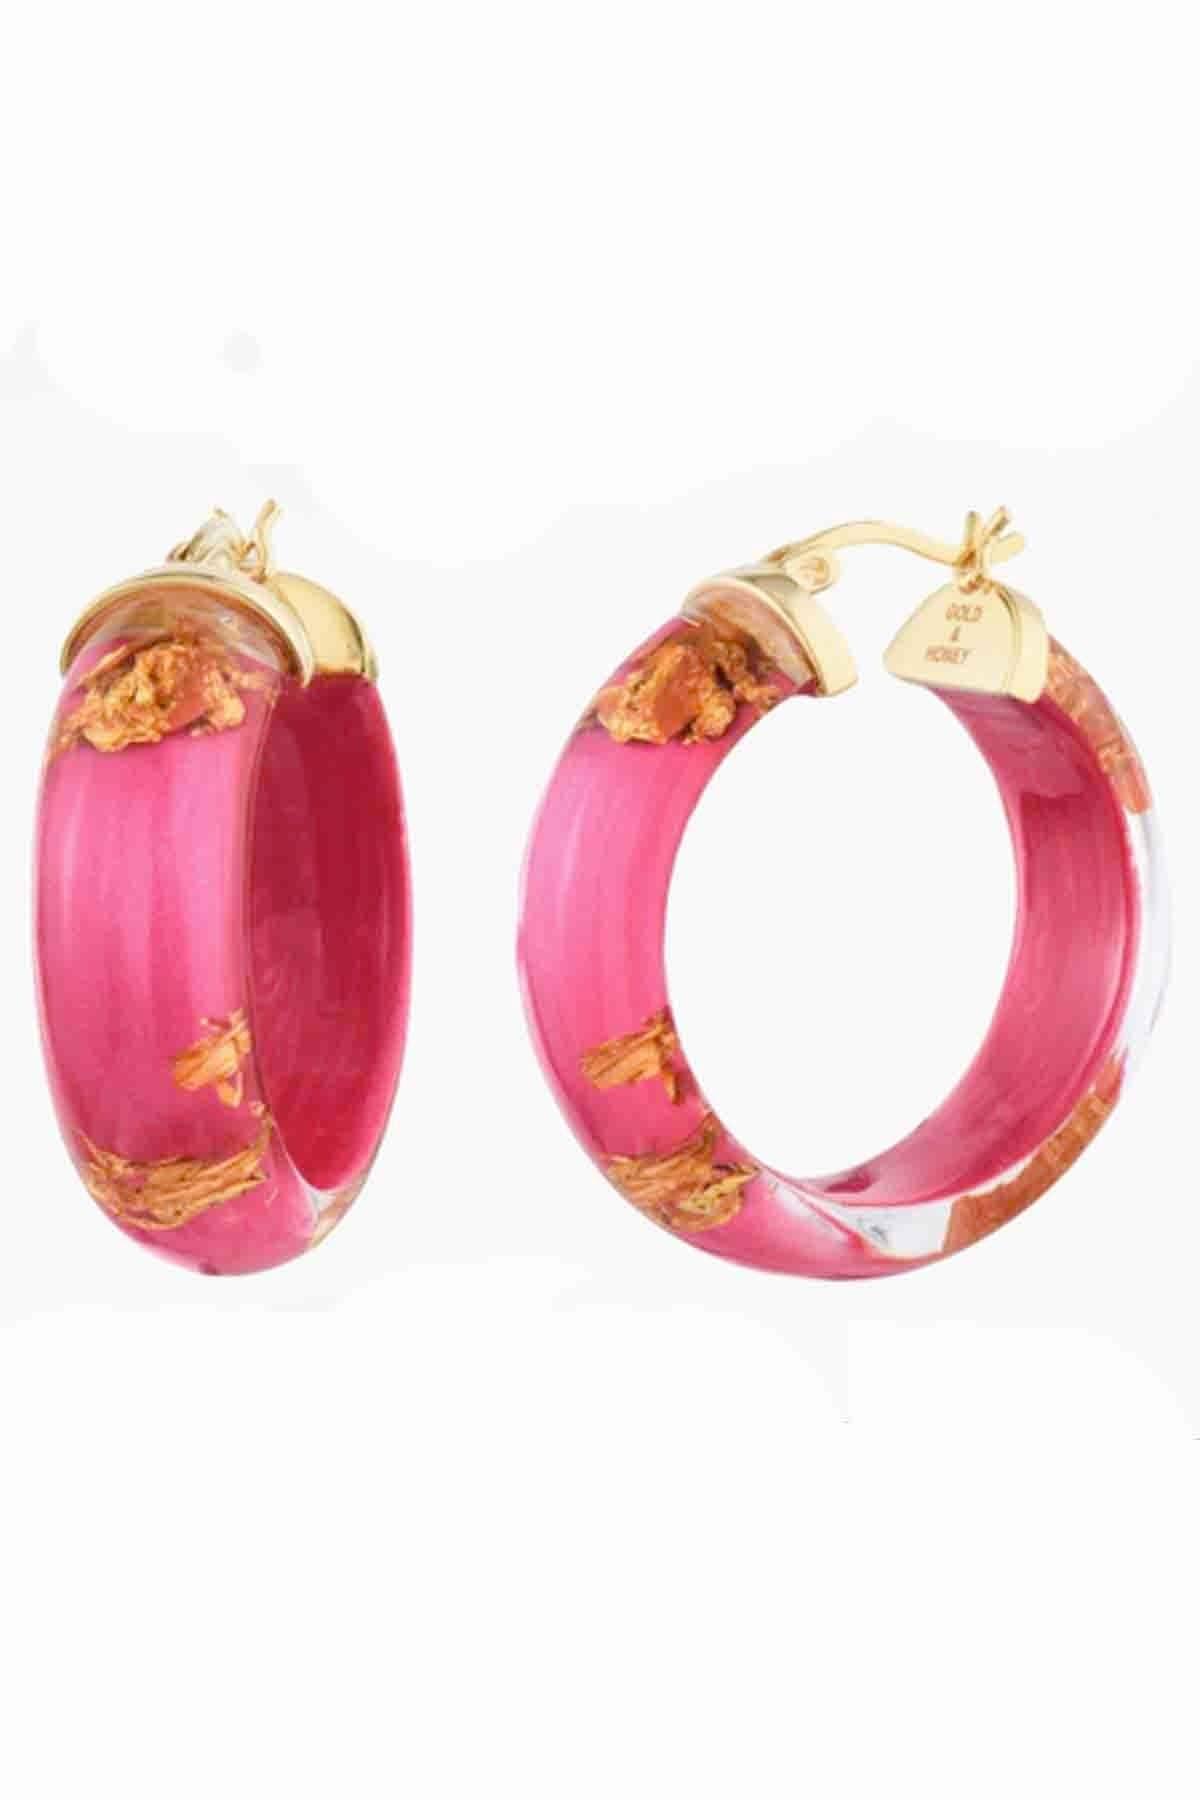 Pink 1.25" Hoops by Gold and Honey infused with 24K Gold Leaf